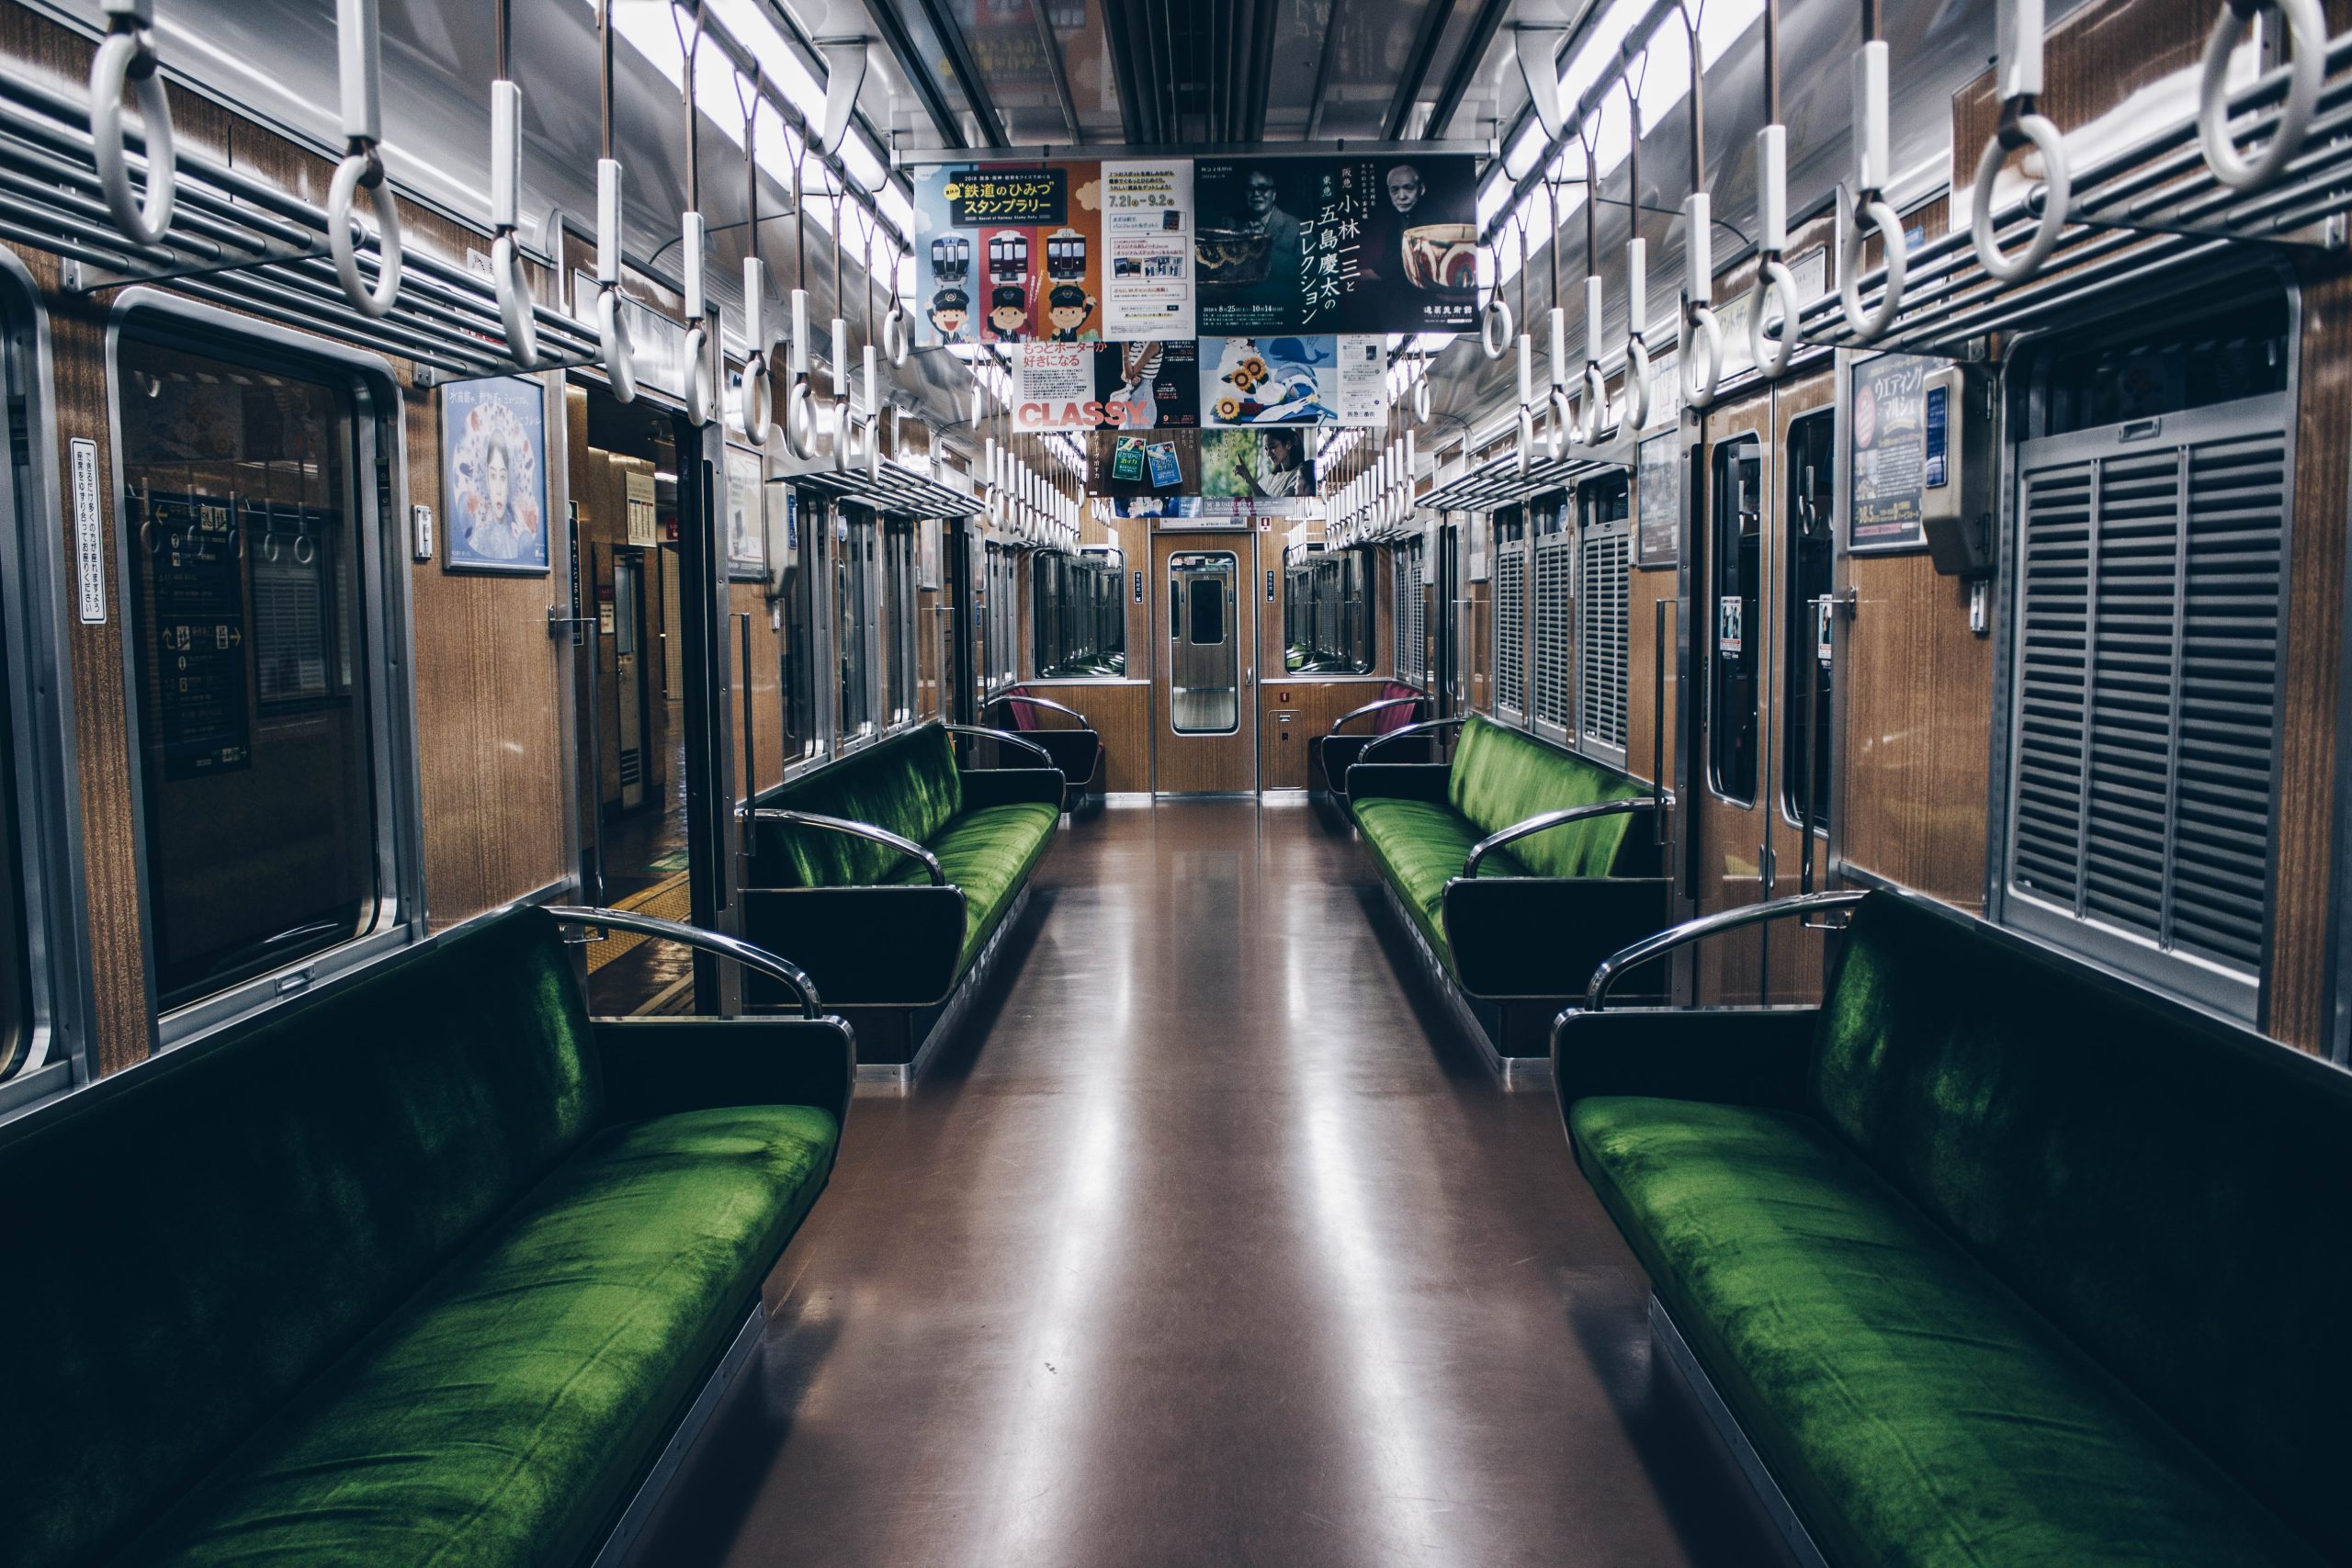 What is Japanese train and bus traffic etiquette?